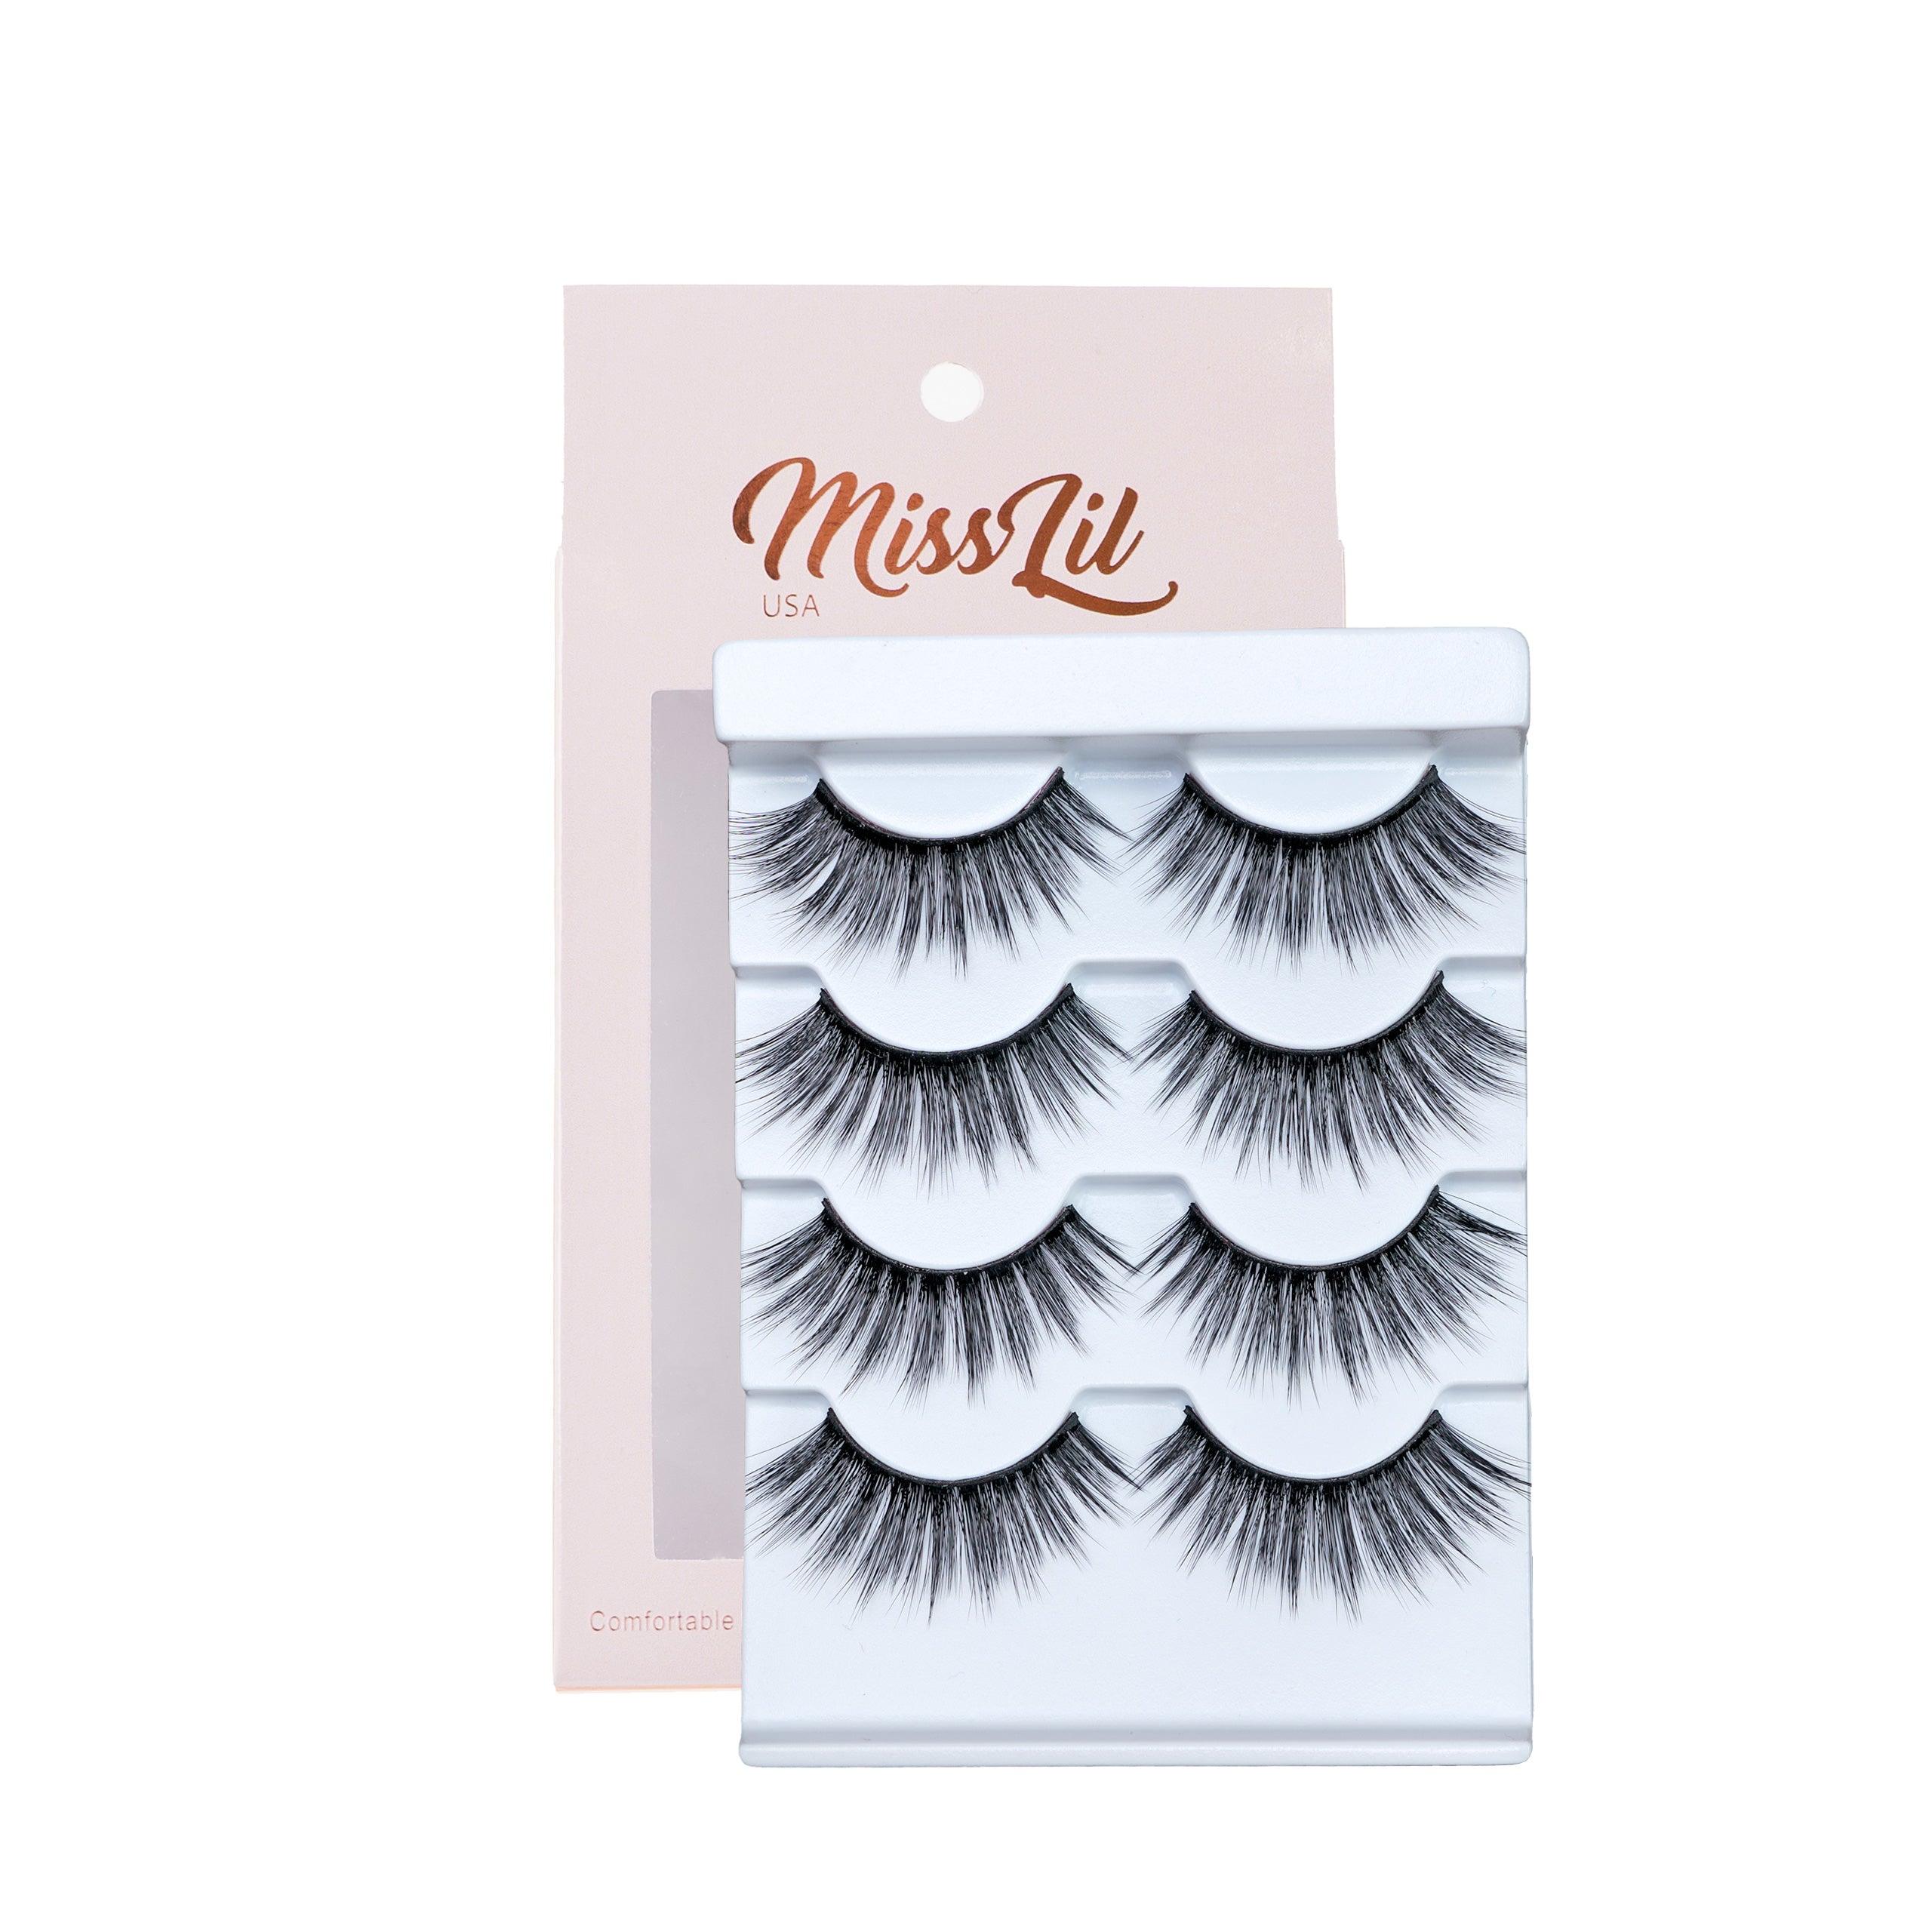 4 Pairs Lashes - Classic Collection #1 - Miss Lil USA